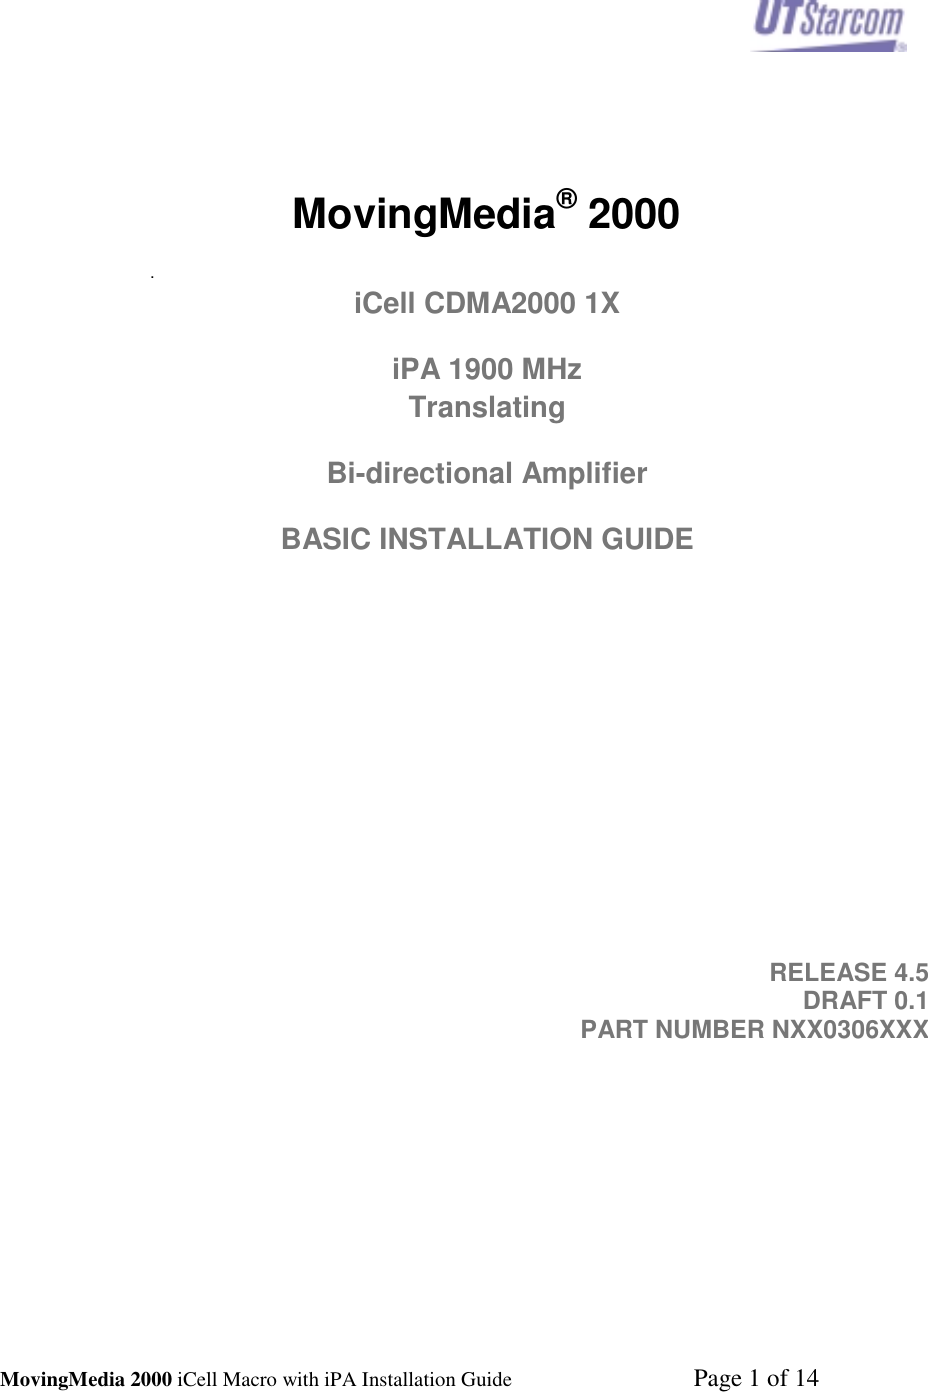 MovingMedia 2000 iCell Macro with iPA Installation Guide    Page 1 of 14MovingMedia® 2000.iCell CDMA2000 1XiPA 1900 MHzTranslatingBi-directional AmplifierBASIC INSTALLATION GUIDERELEASE 4.5DRAFT 0.1PART NUMBER NXX0306XXX